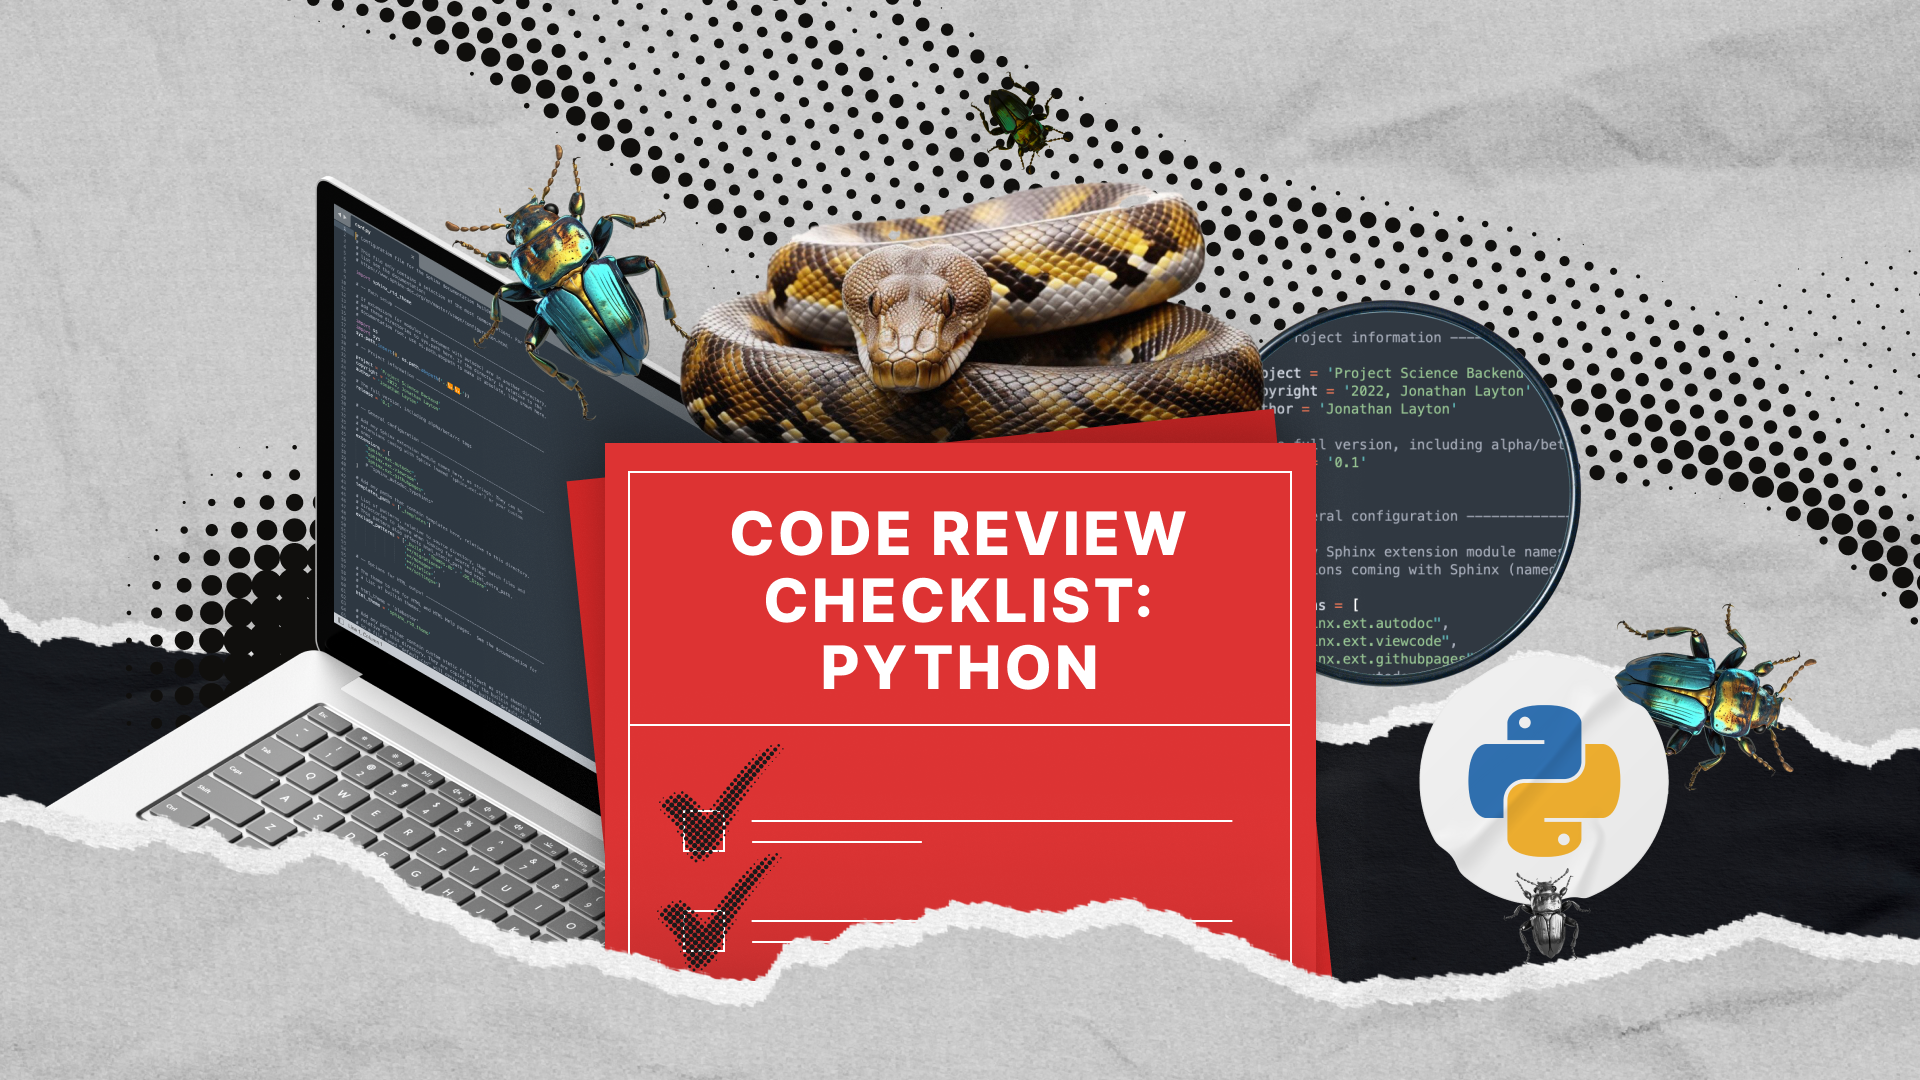 Python Code Review Checklist from Redwerk – All Steps Included